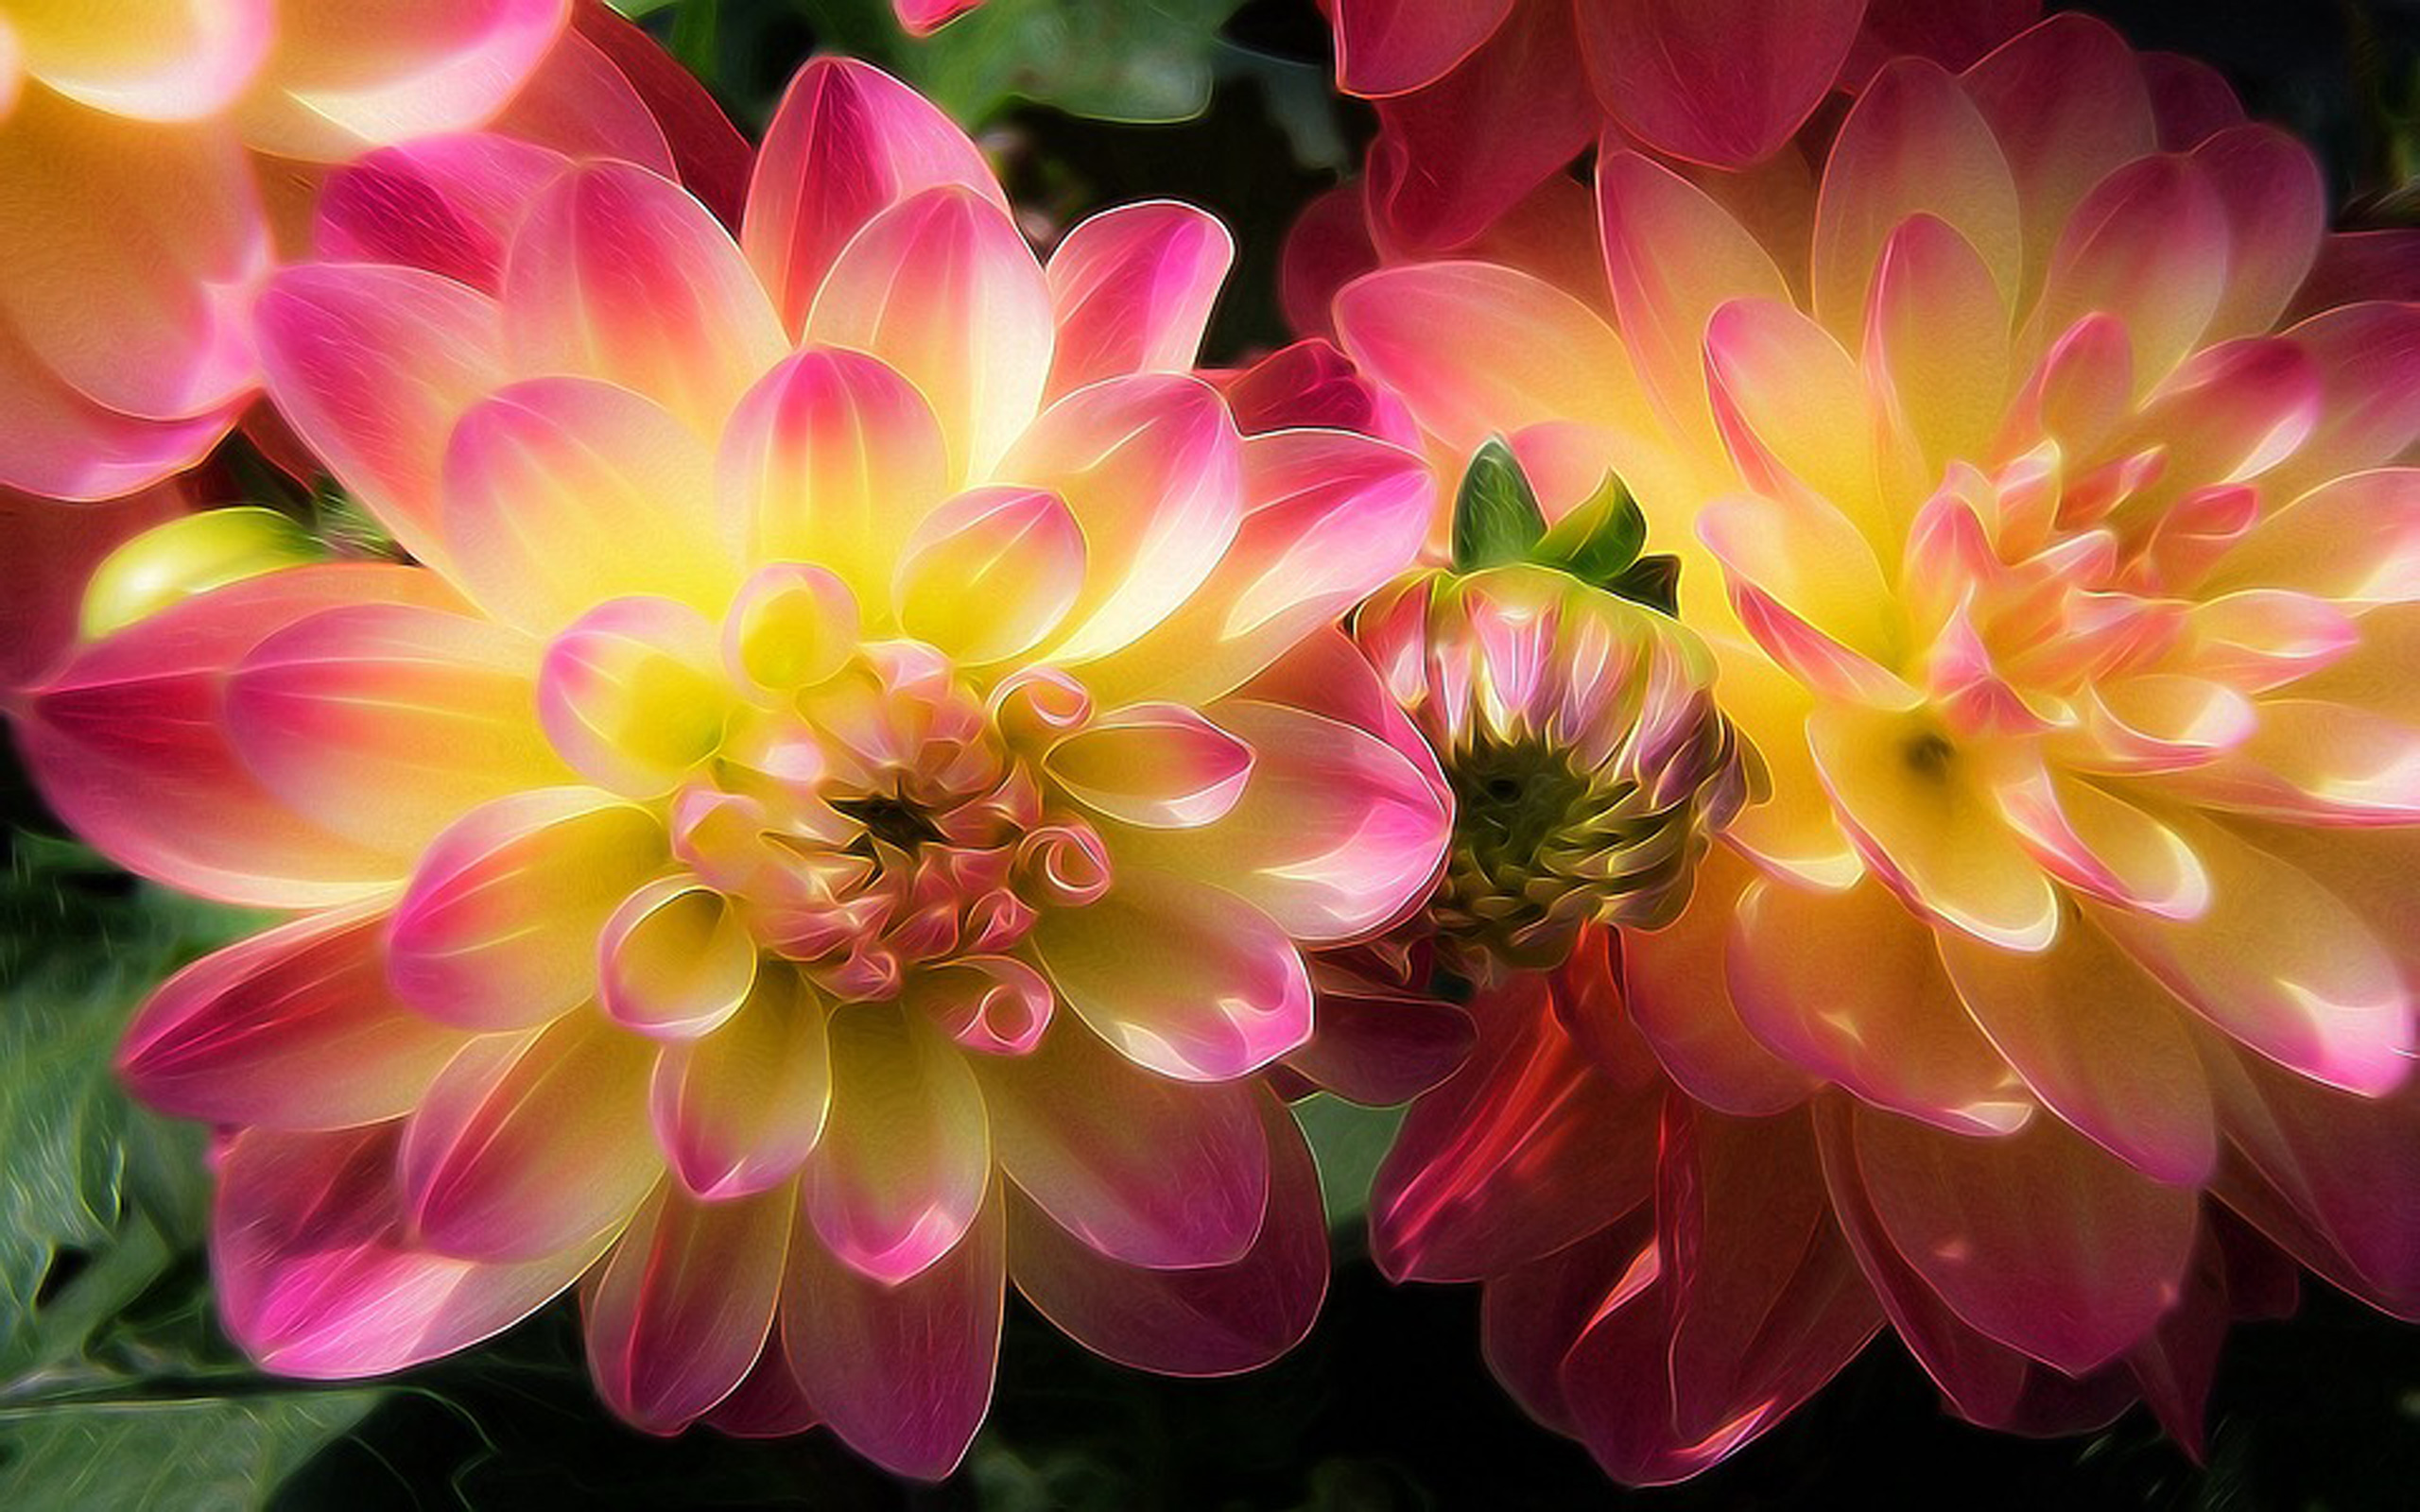 Dahlia Flowers With Yellow And Pink Wallpaper For Pc ...
